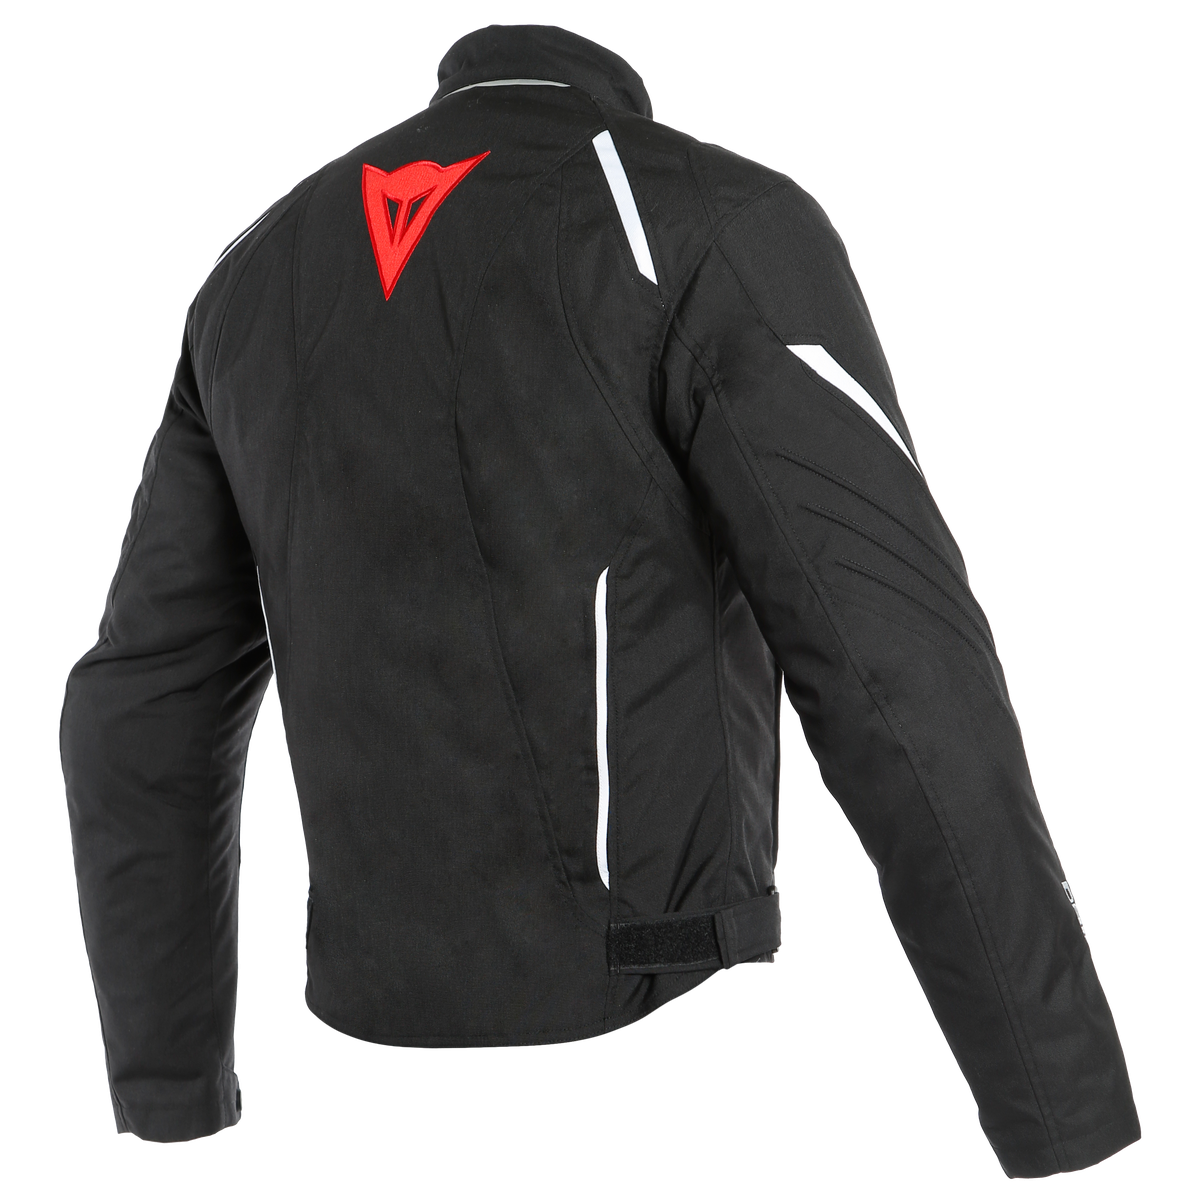 Viewing Images For Dainese Laguna Seca 3 D-Dry Jacket :: MotorcycleGear.com